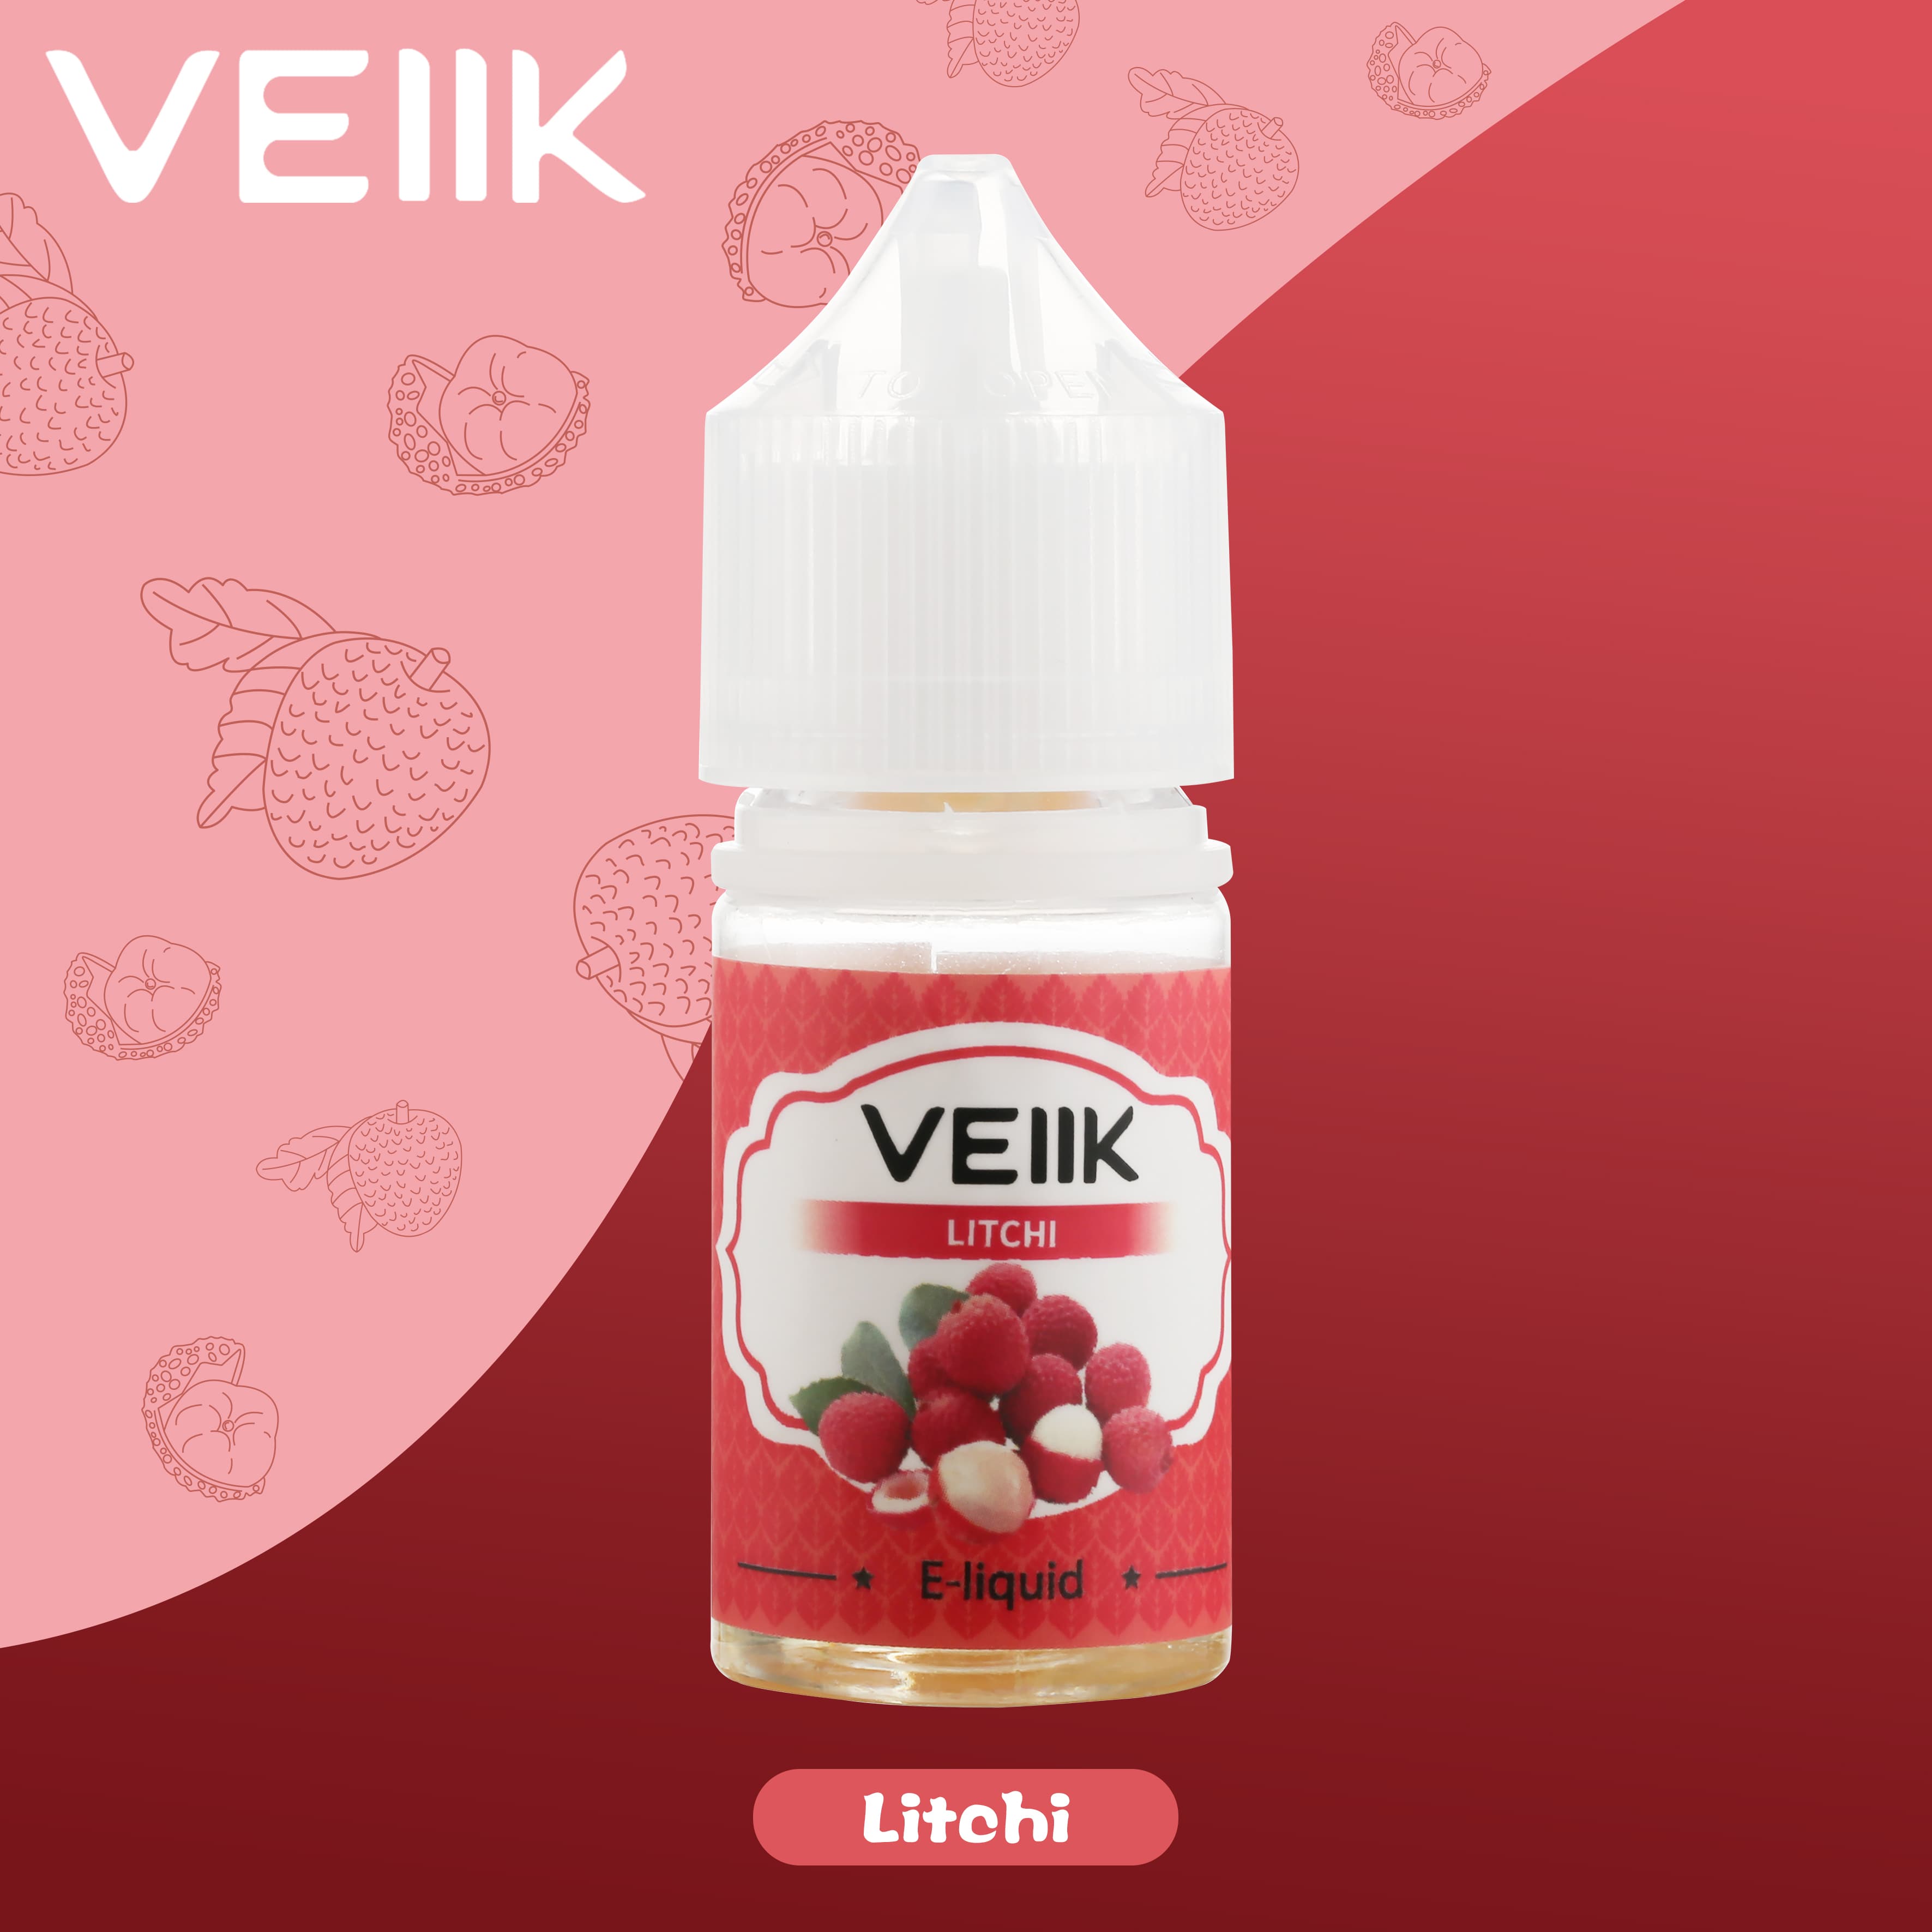 VEIIK exquisite electronic cigarette accessories great for vape pods-7